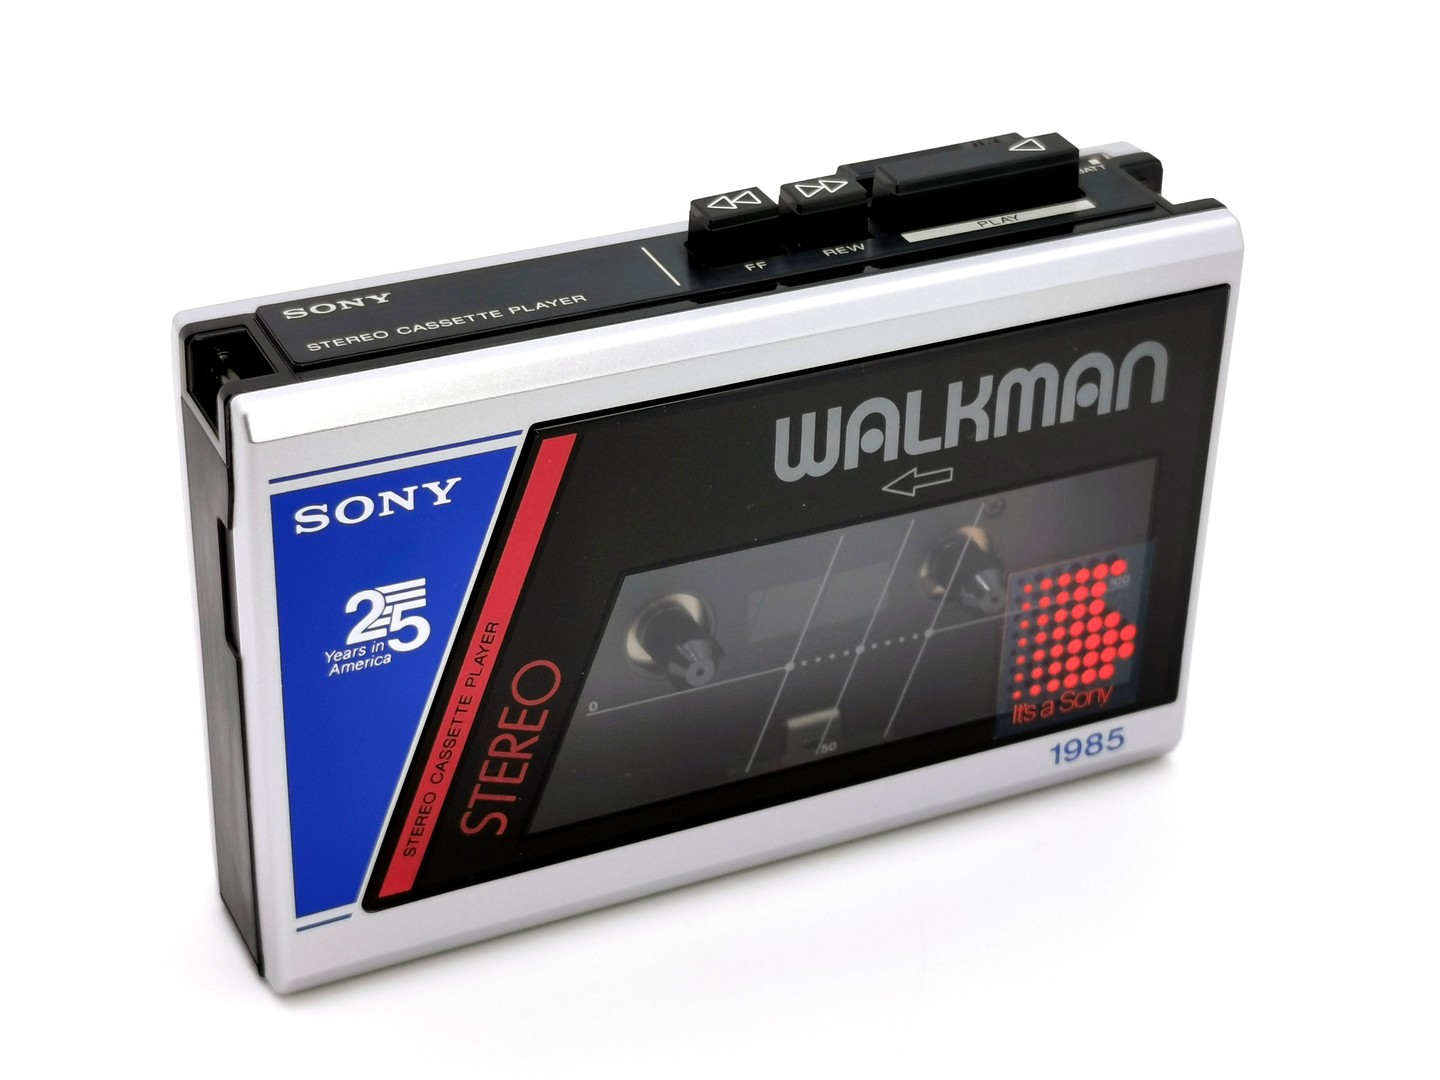 Sony_WM-11_-_Front_top_side_angled_ig-boxedwalkman